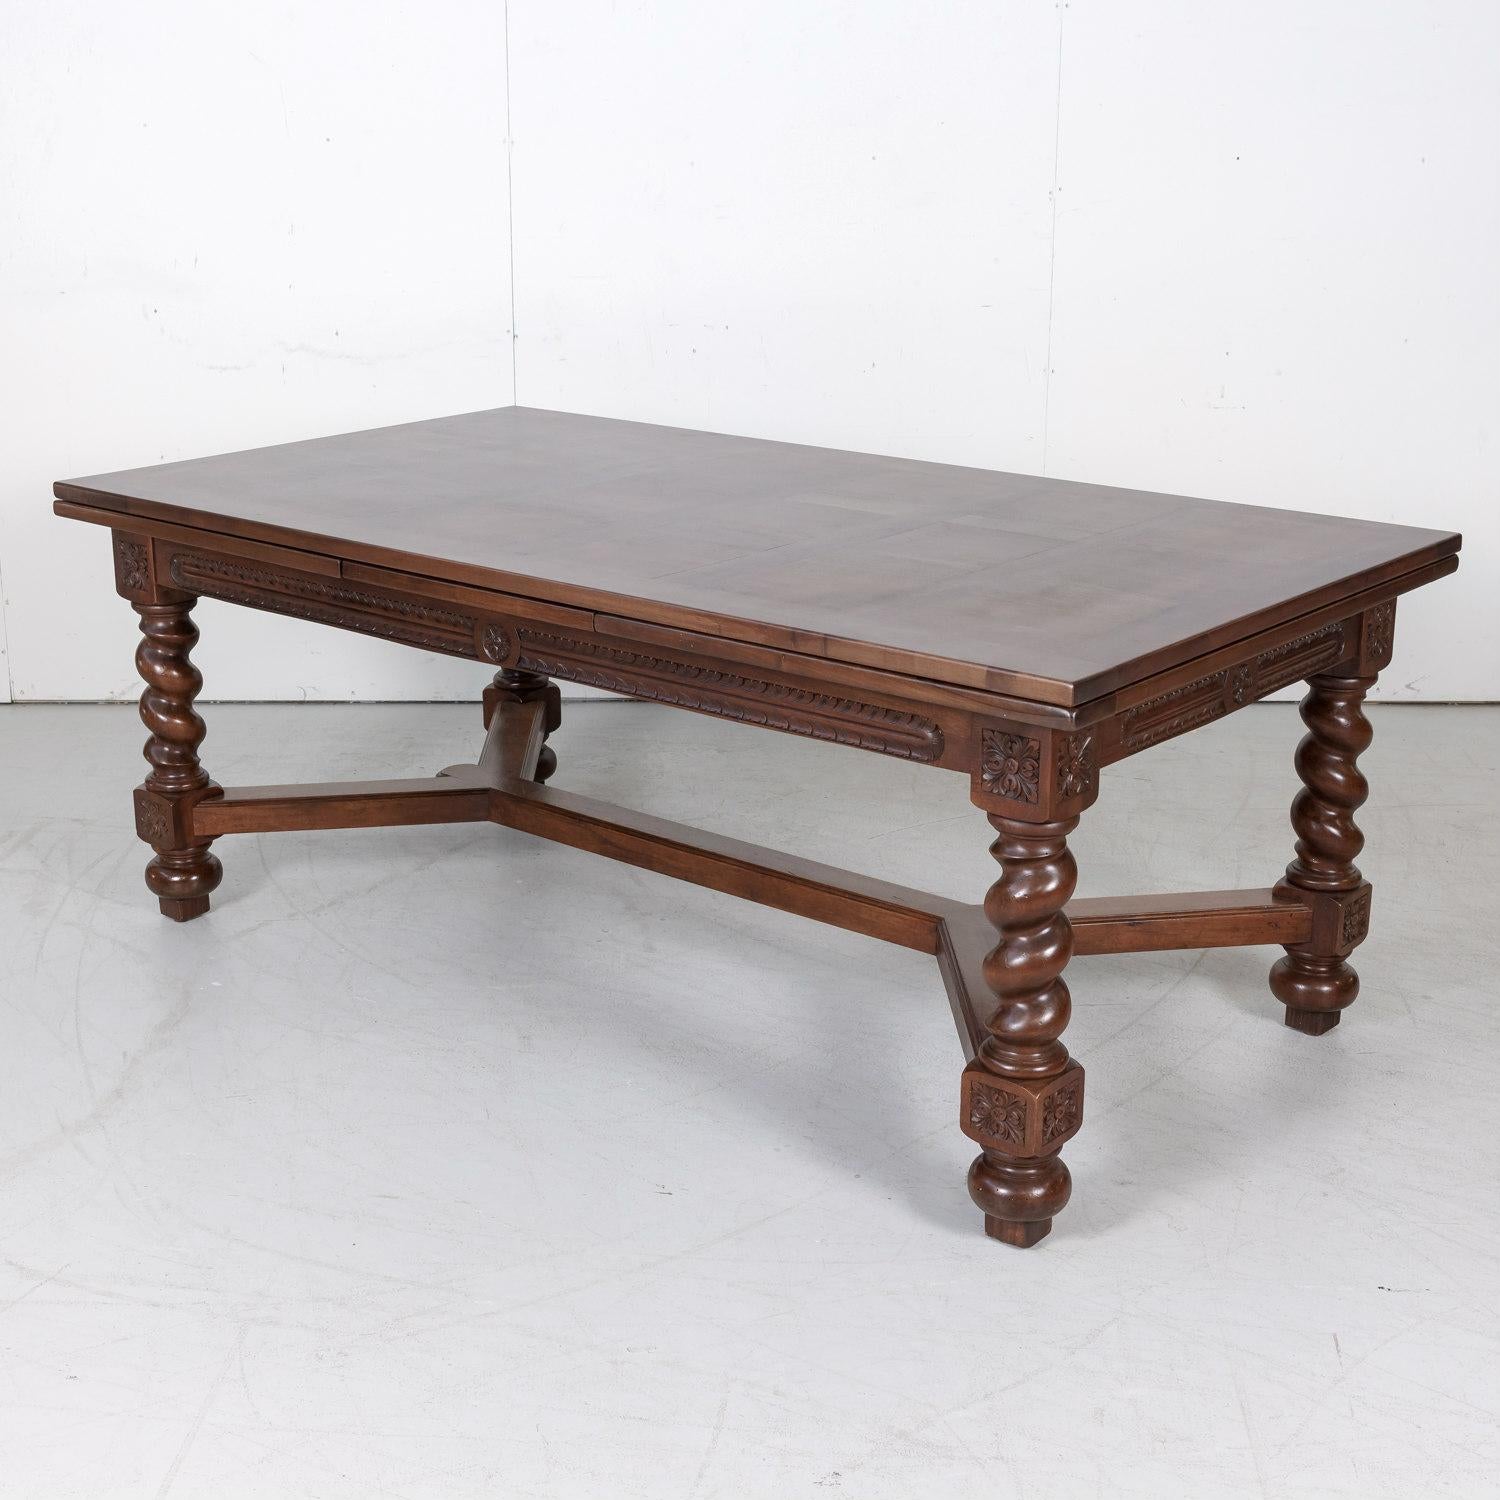 Antique French draw leaf or refectory table handcrafted of walnut near Lyon, circa 1920s, having a parquet top with draw leaves sitting above a carved apron. The leaves pull out in an instant when needed, then just as quickly tuck back in to reclaim